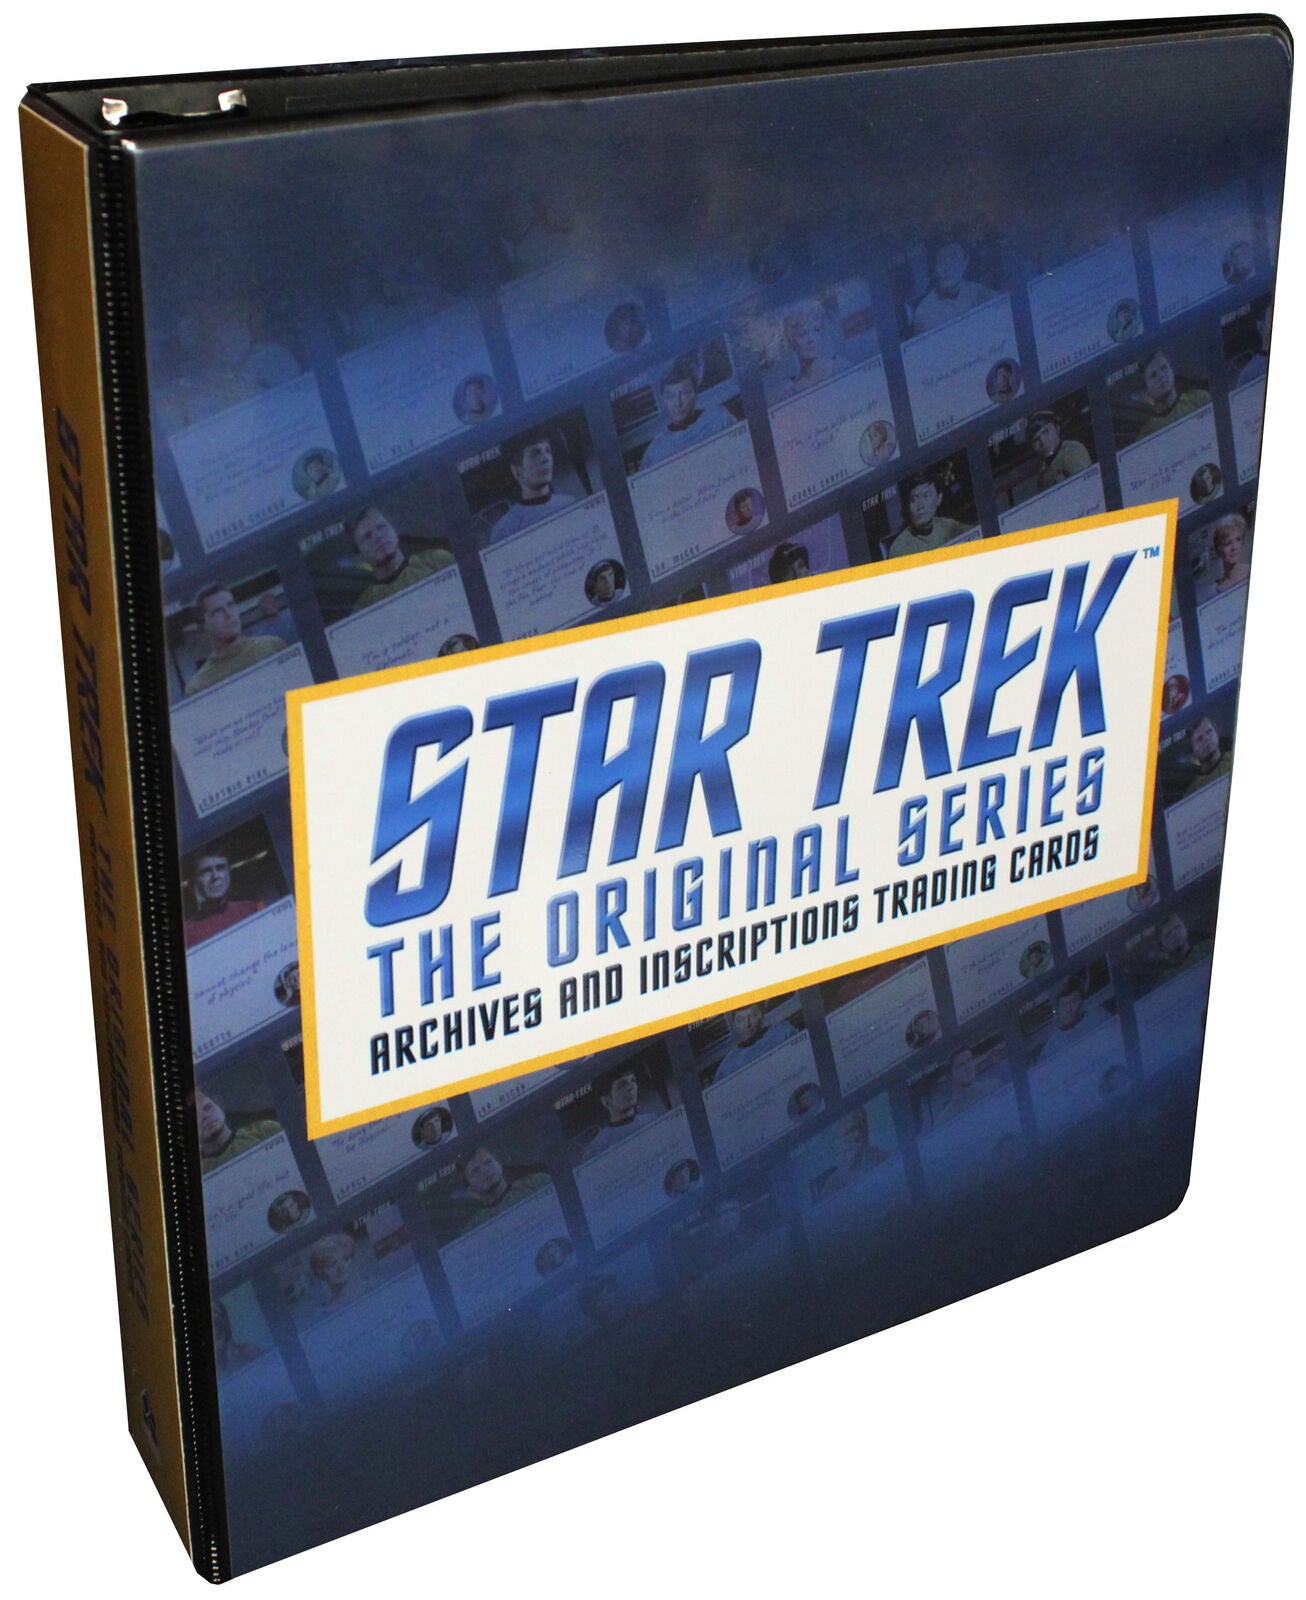 Star Trek TOS Archives & Inscriptions Trading Card Binder Album with P3 Promo